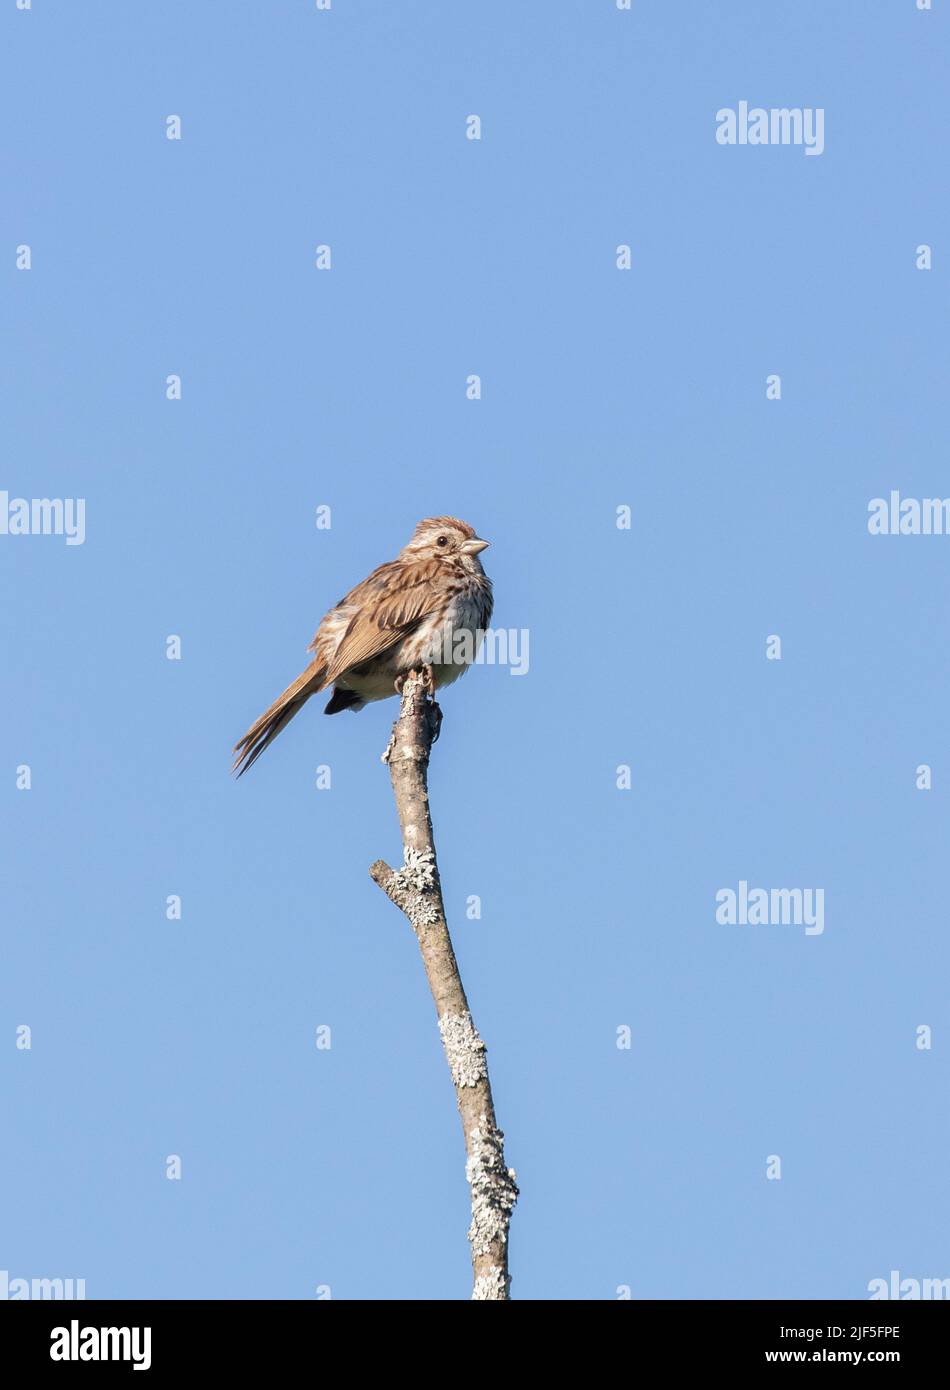 A Song Sparrow perched on a plant in a marsh Stock Photo